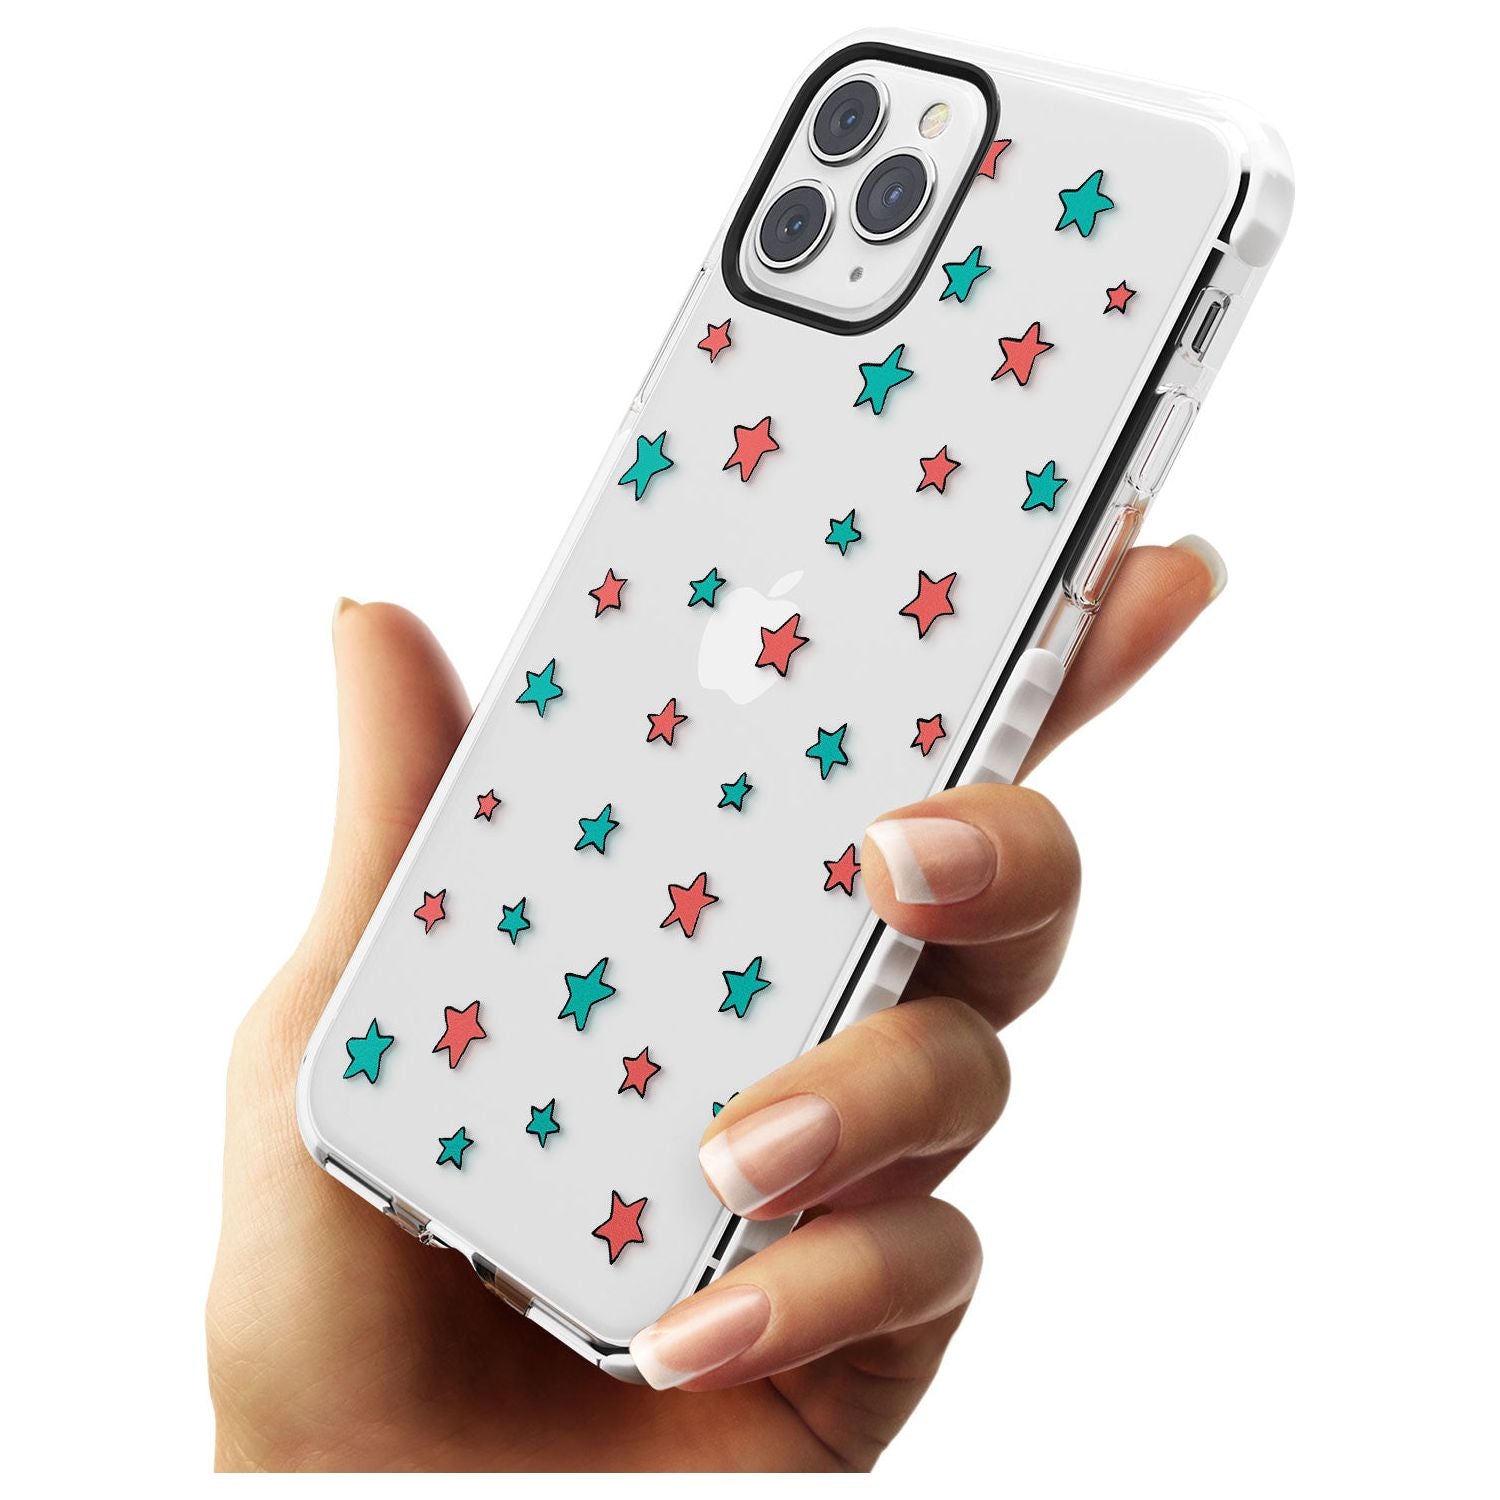 Heartstopper Stars Pattern Impact Phone Case for iPhone 11 Pro Max